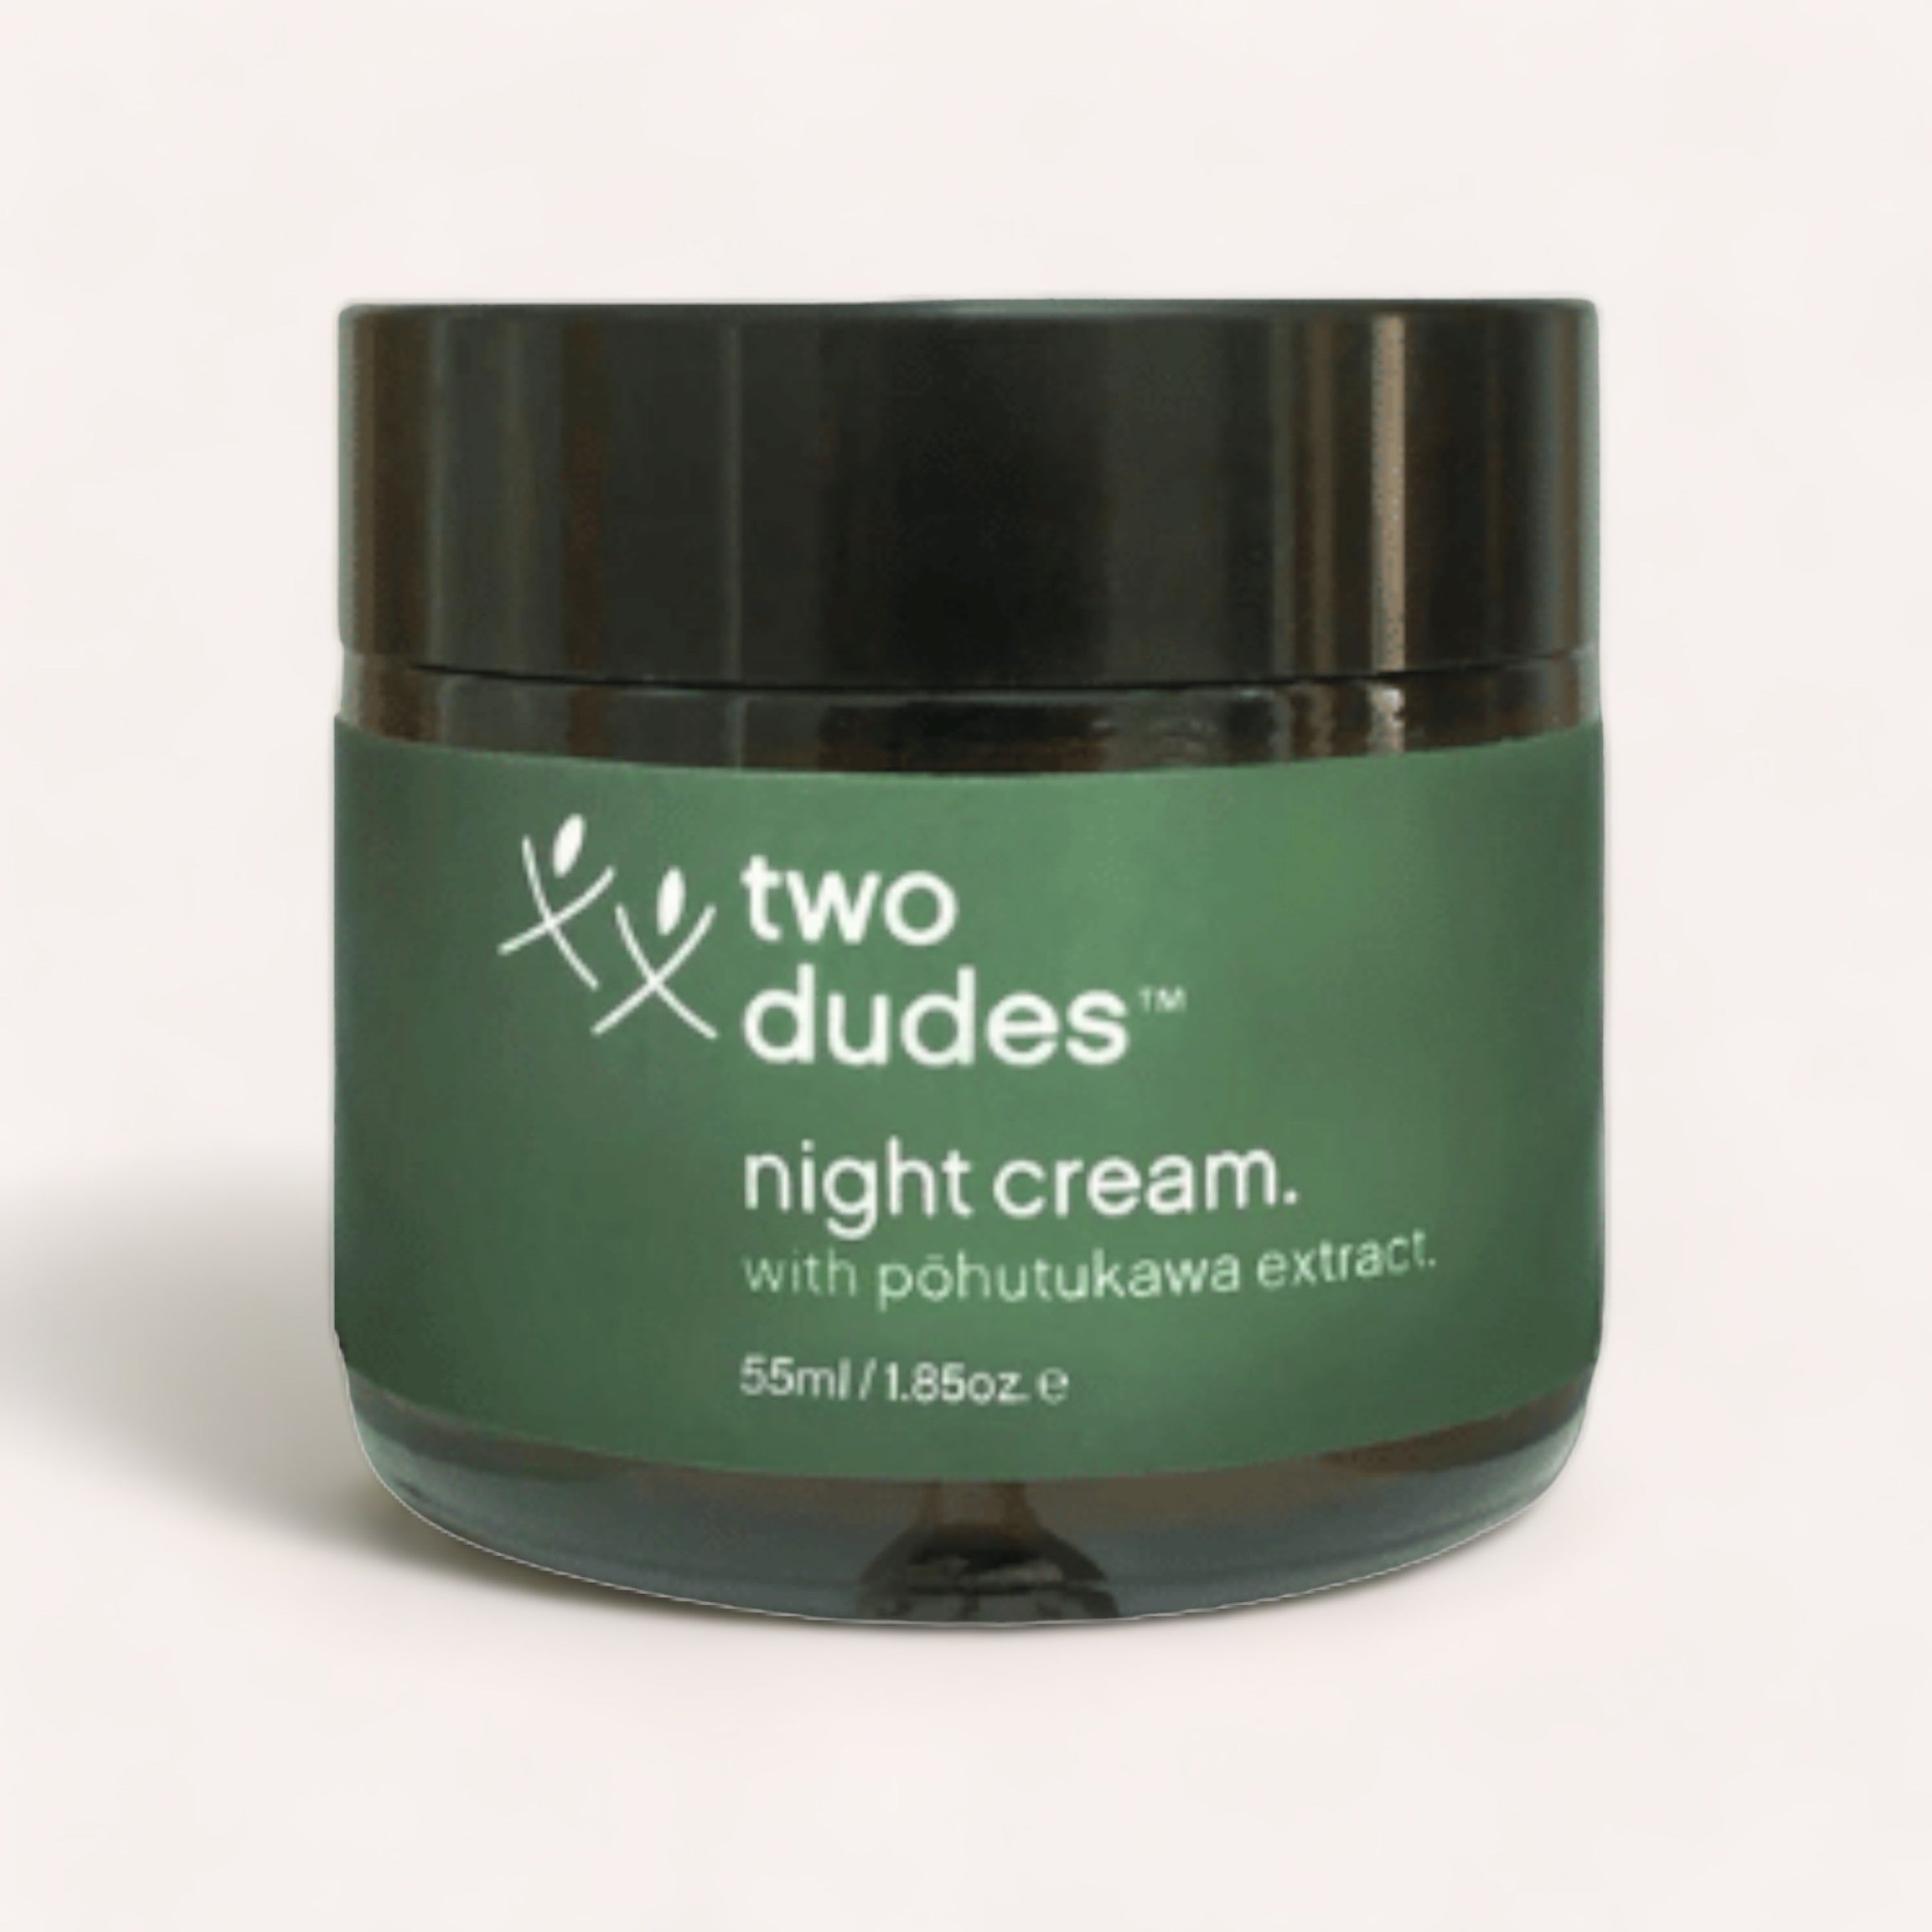 A small container with a green label for Night Cream by Two Dudes, an anti-aging cream.